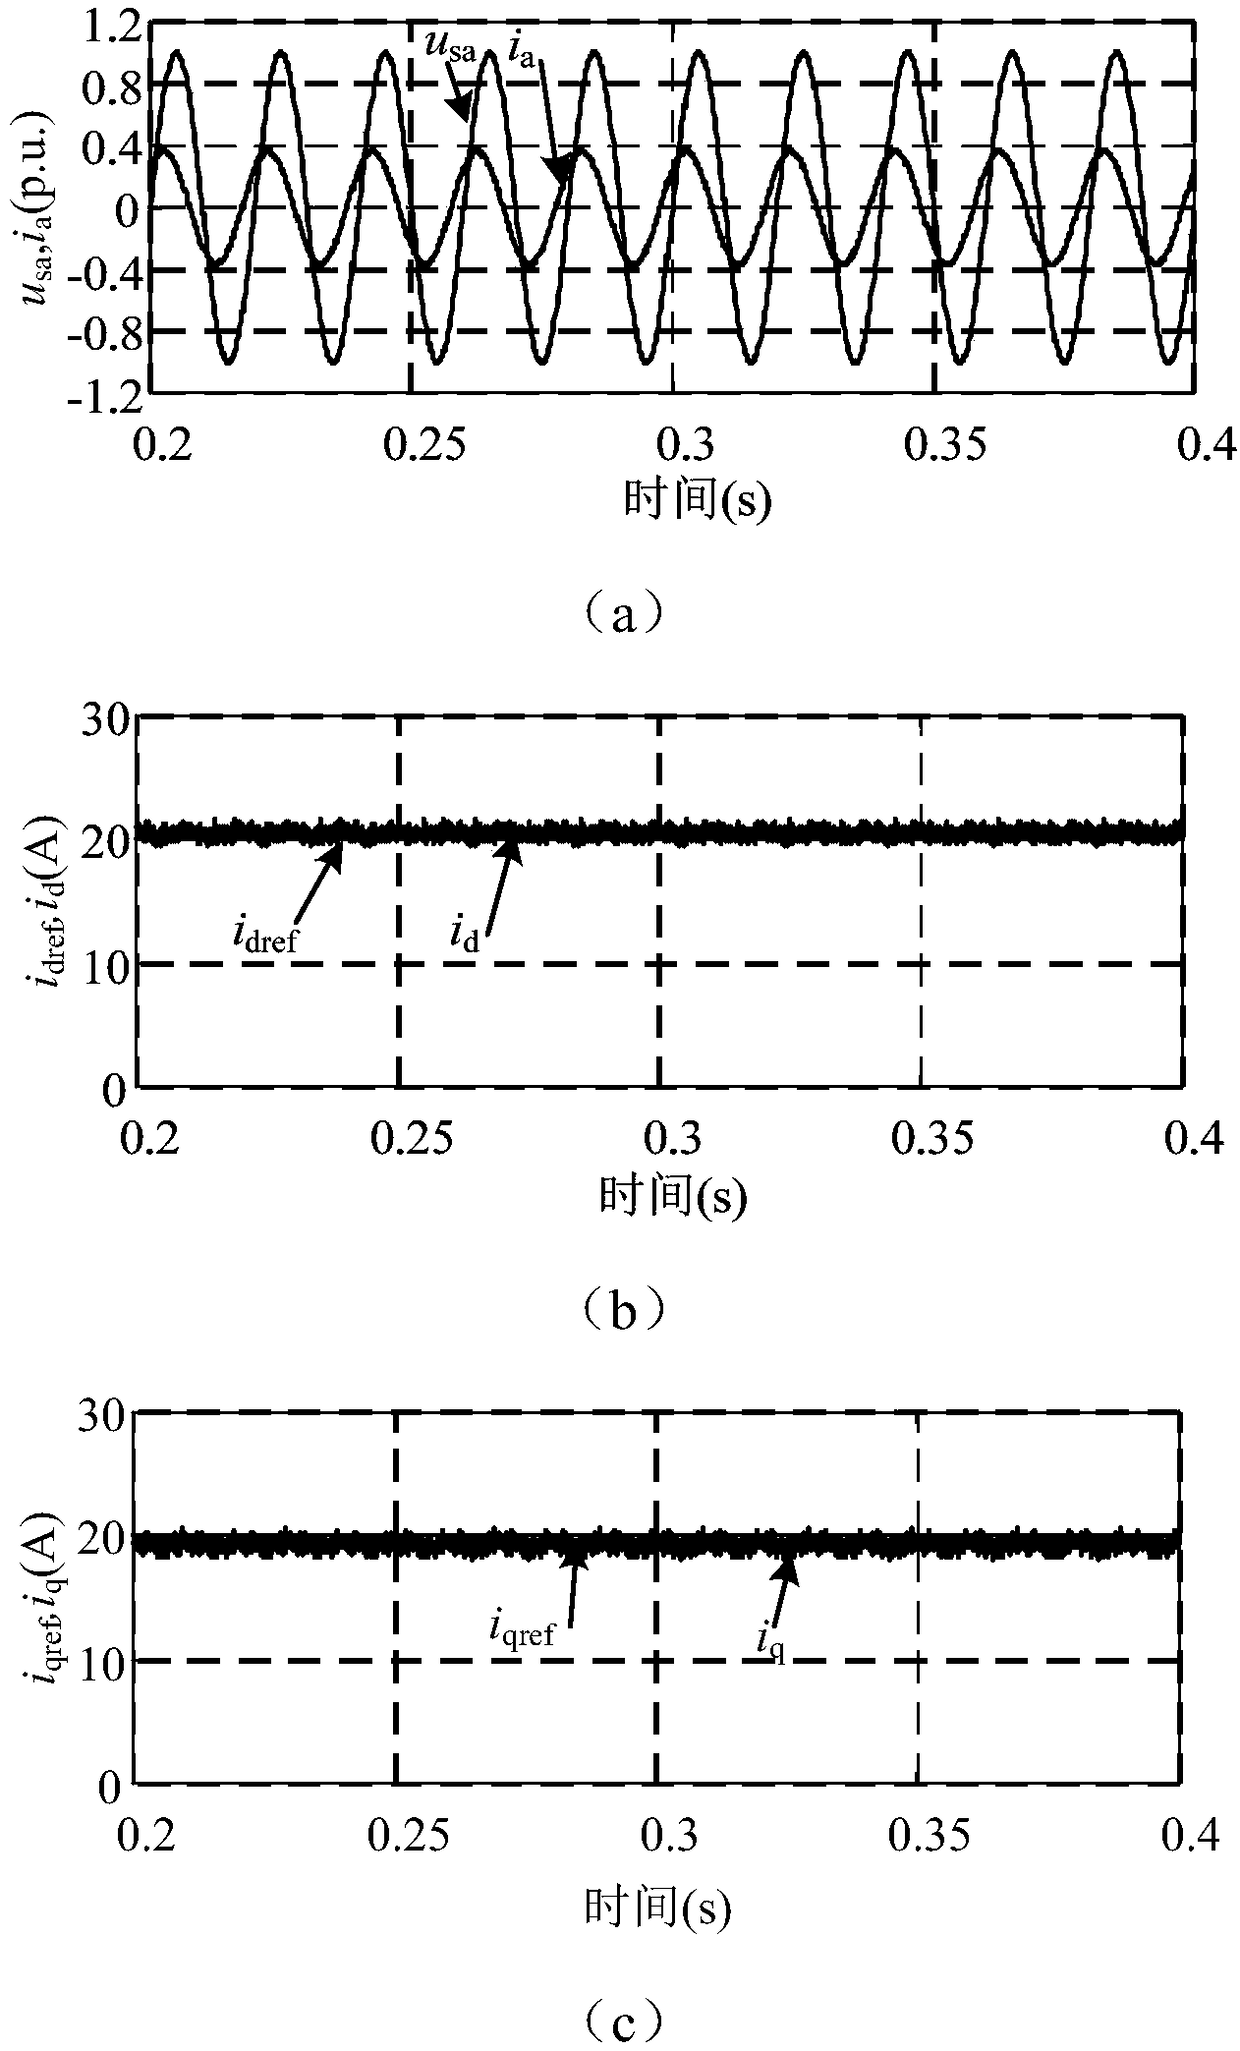 An improved passive control method for three-phase grid-connected inverter based on disturbance observer compensation